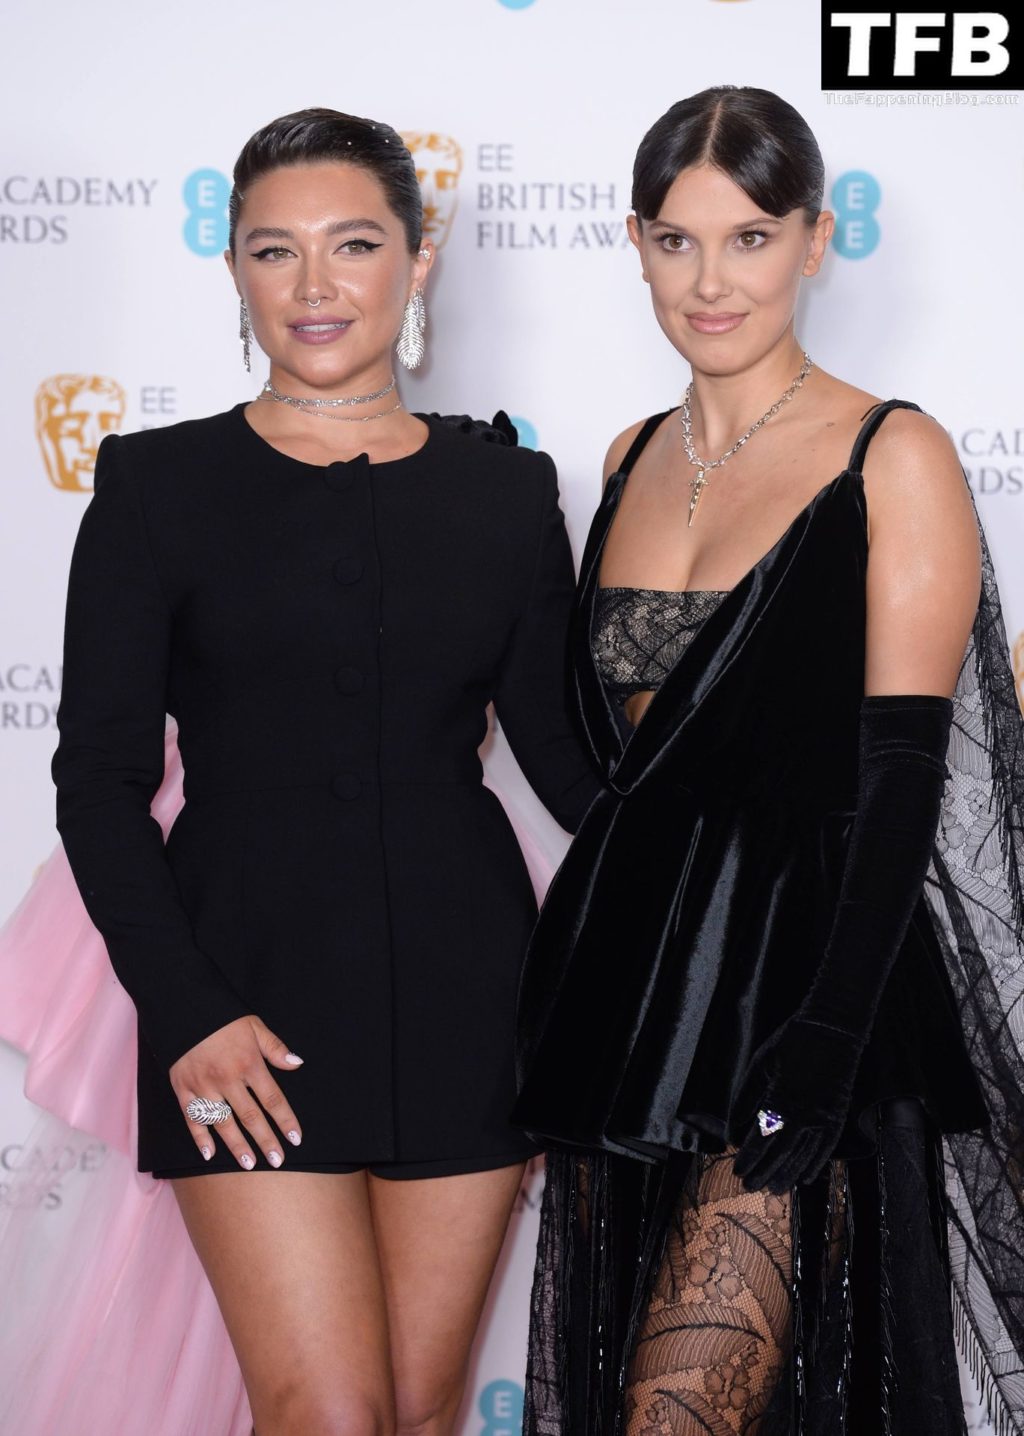 Florence Pugh Millie Bobby Brown Sexy 11 thefappeningblog.com  1024x1436 - Florence Pugh & Millie Bobby Brown Pose at the British Academy Film Awards (30 Photos)